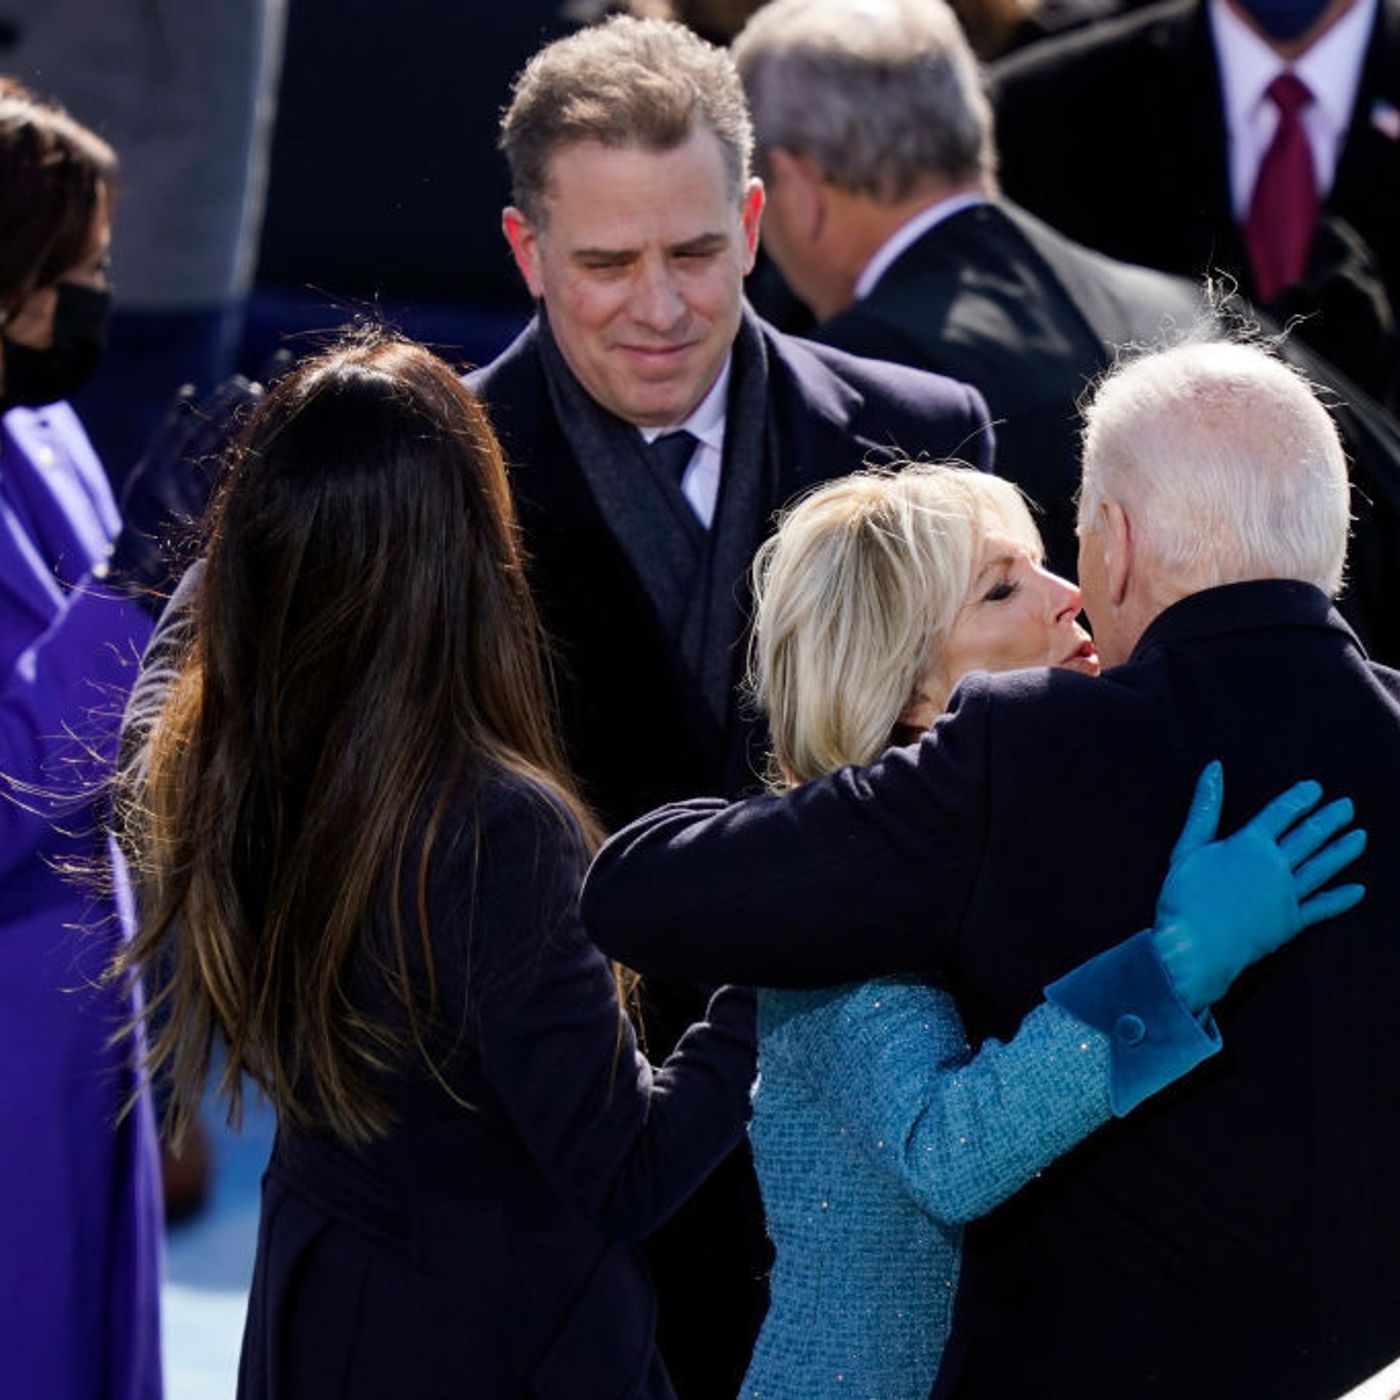 What do we know about Joe Biden's family dealings?